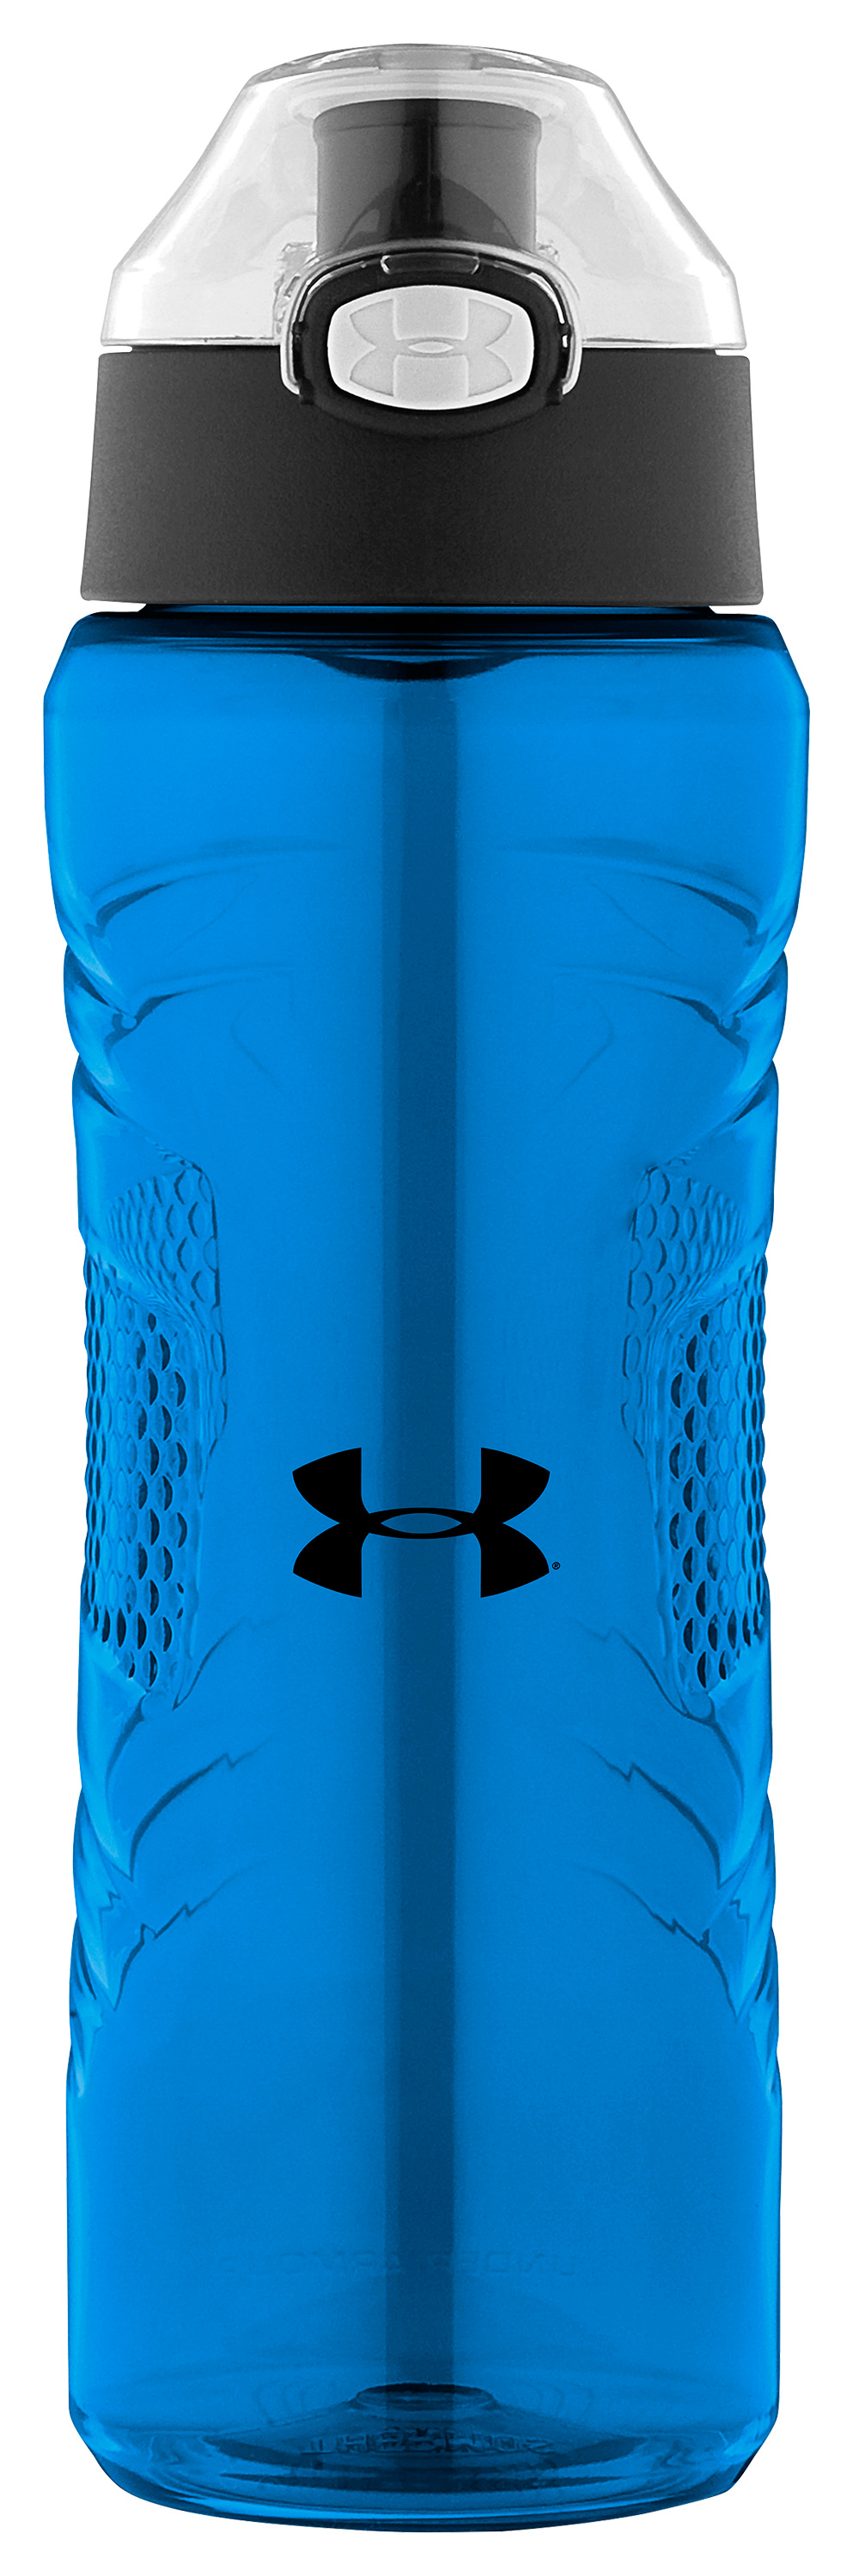 Under Armour's Thermos-made 24-Oz. water bottle is 25% off, now under $13